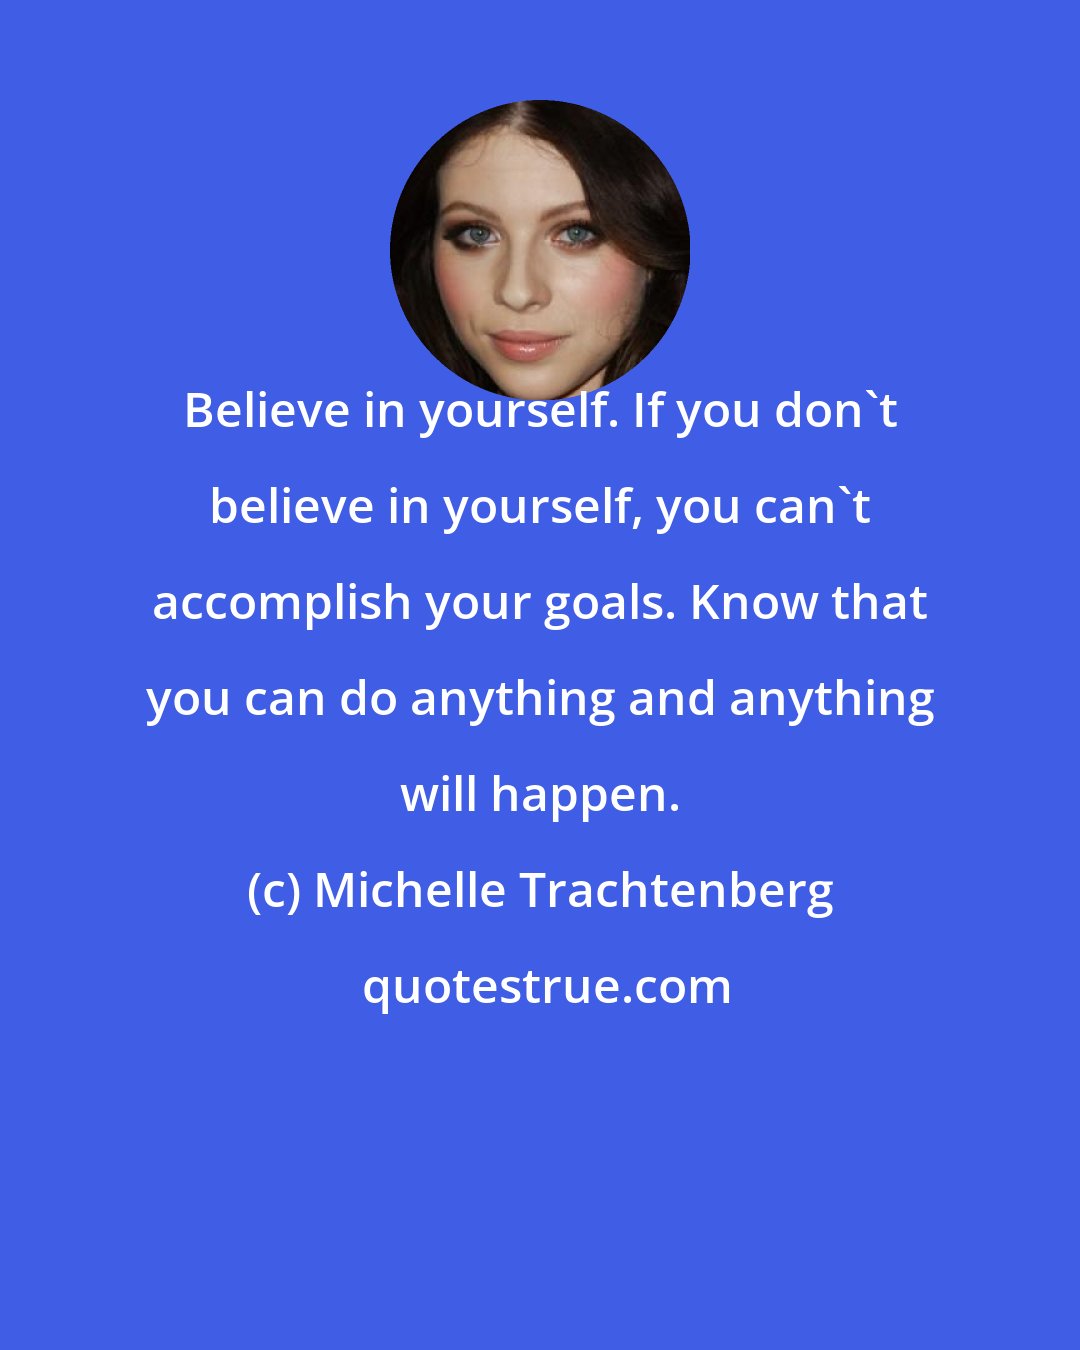 Michelle Trachtenberg: Believe in yourself. If you don't believe in yourself, you can't accomplish your goals. Know that you can do anything and anything will happen.